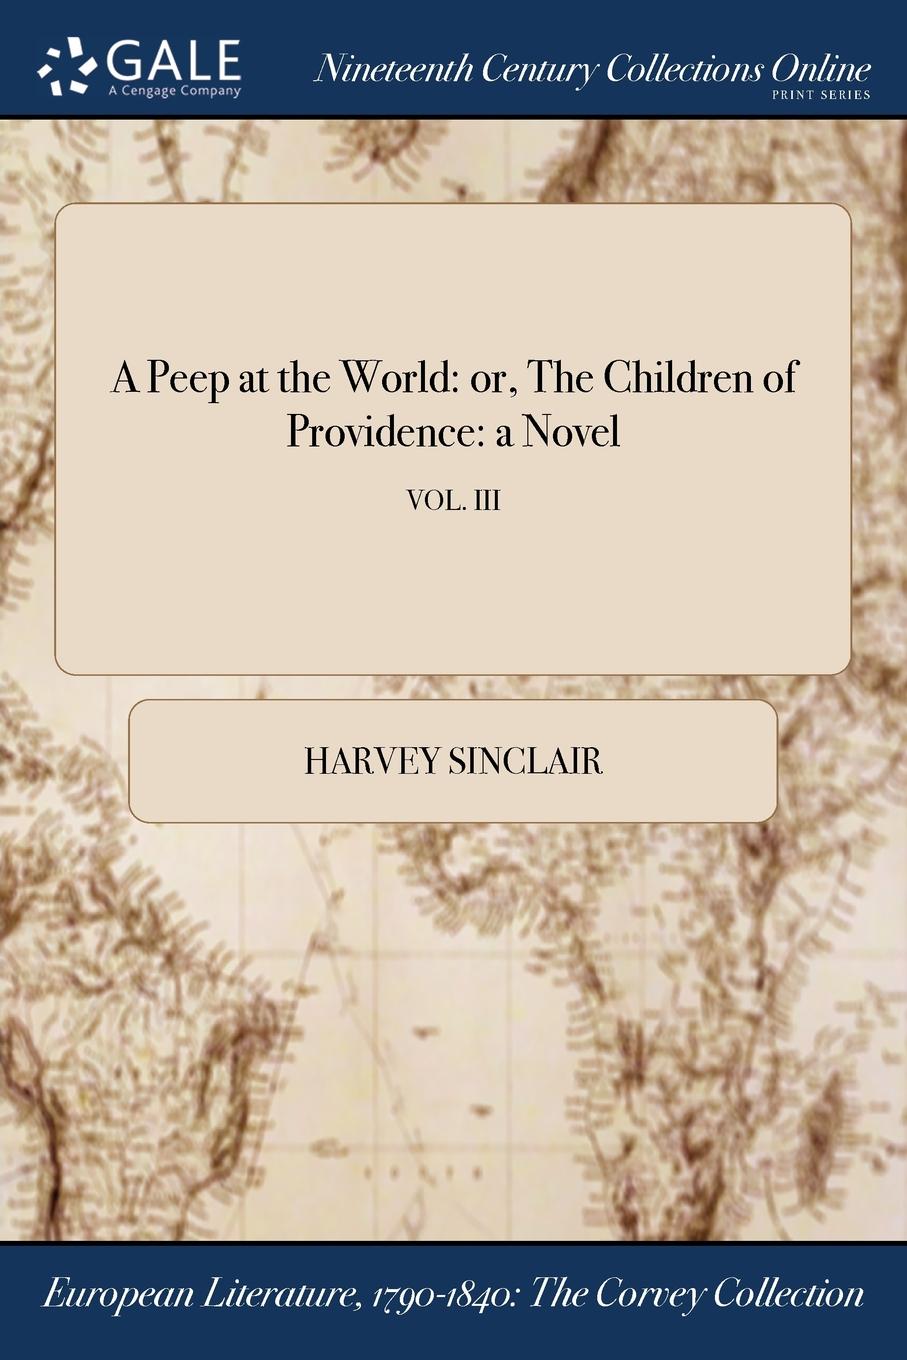 A Peep at the World. or, The Children of Providence: a Novel; VOL. III